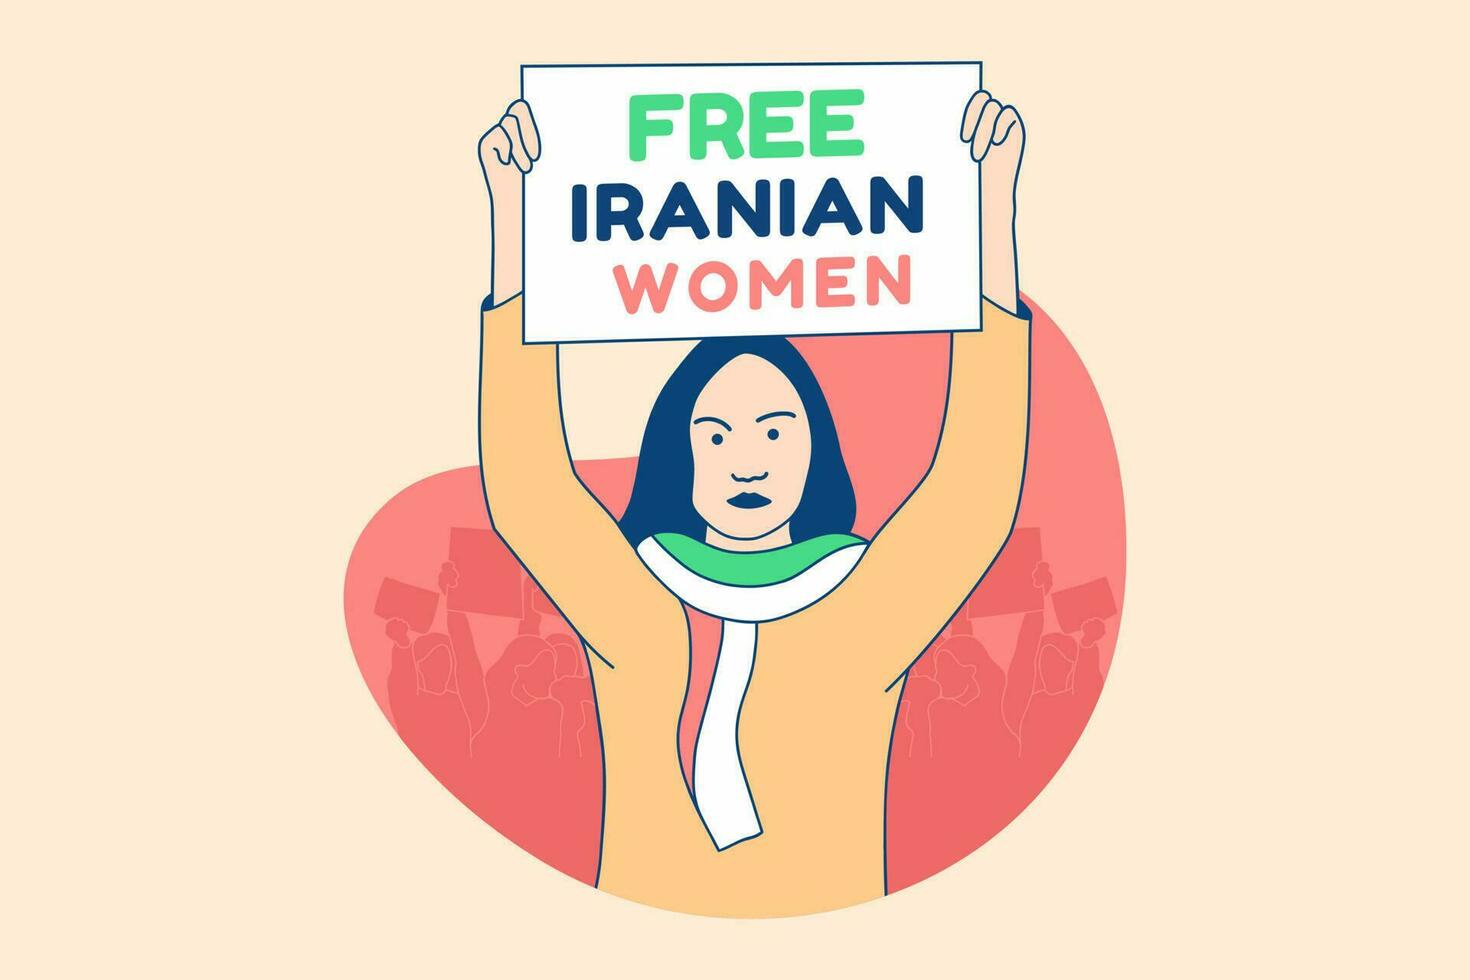 Illustrations beautiful Iranian woman protesters for Free Iranian Women campaign Design concept vector